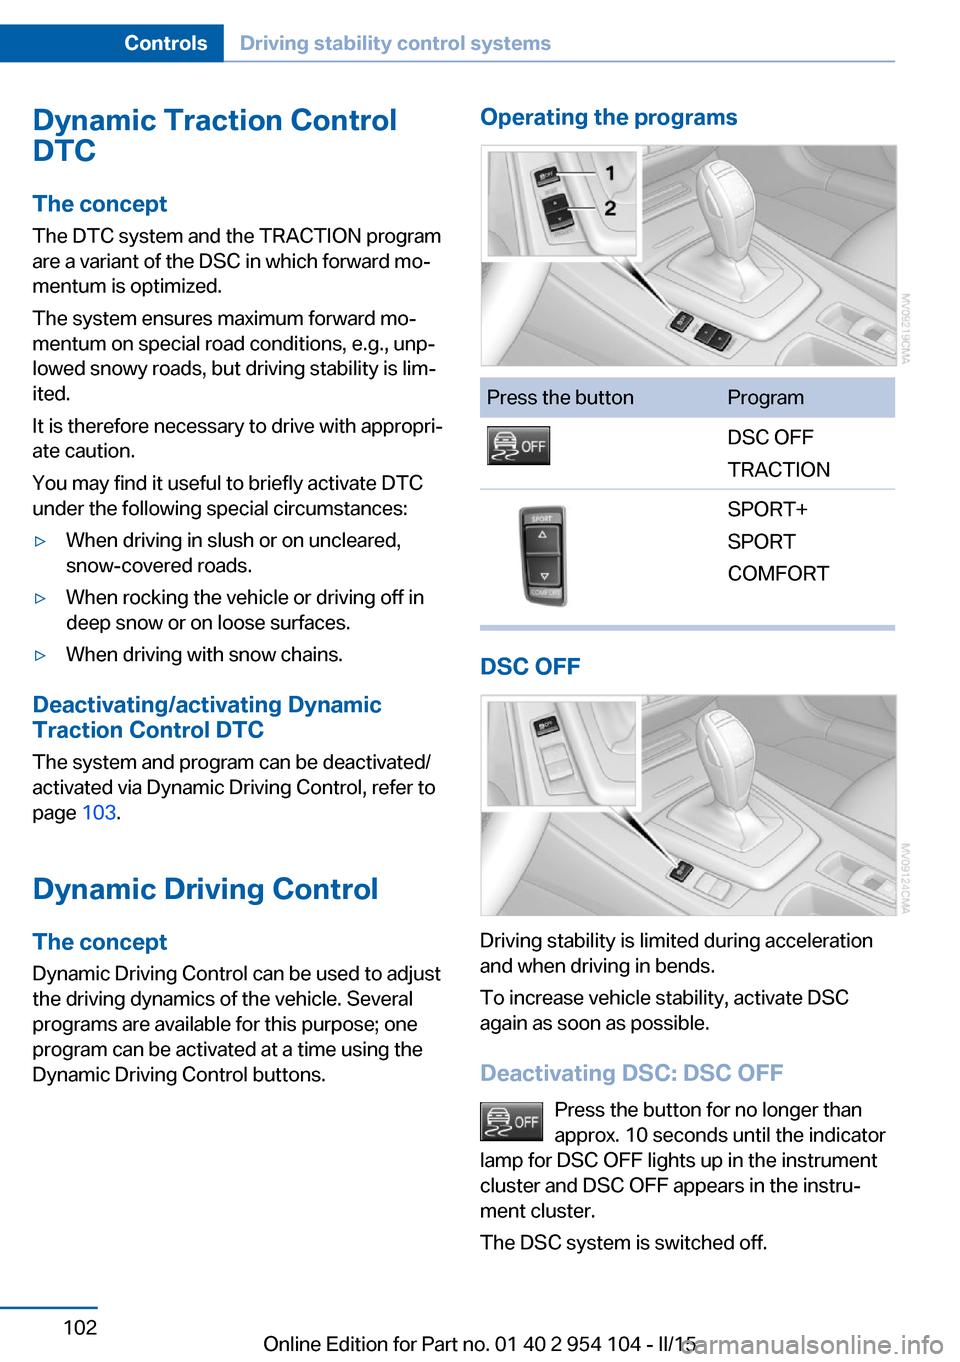 BMW Z4 2015 E89 Owners Guide Dynamic Traction Control
DTC
The concept The DTC system and the TRACTION program
are a variant of the DSC in which forward mo‐
mentum is optimized.
The system ensures maximum forward mo‐
mentum on